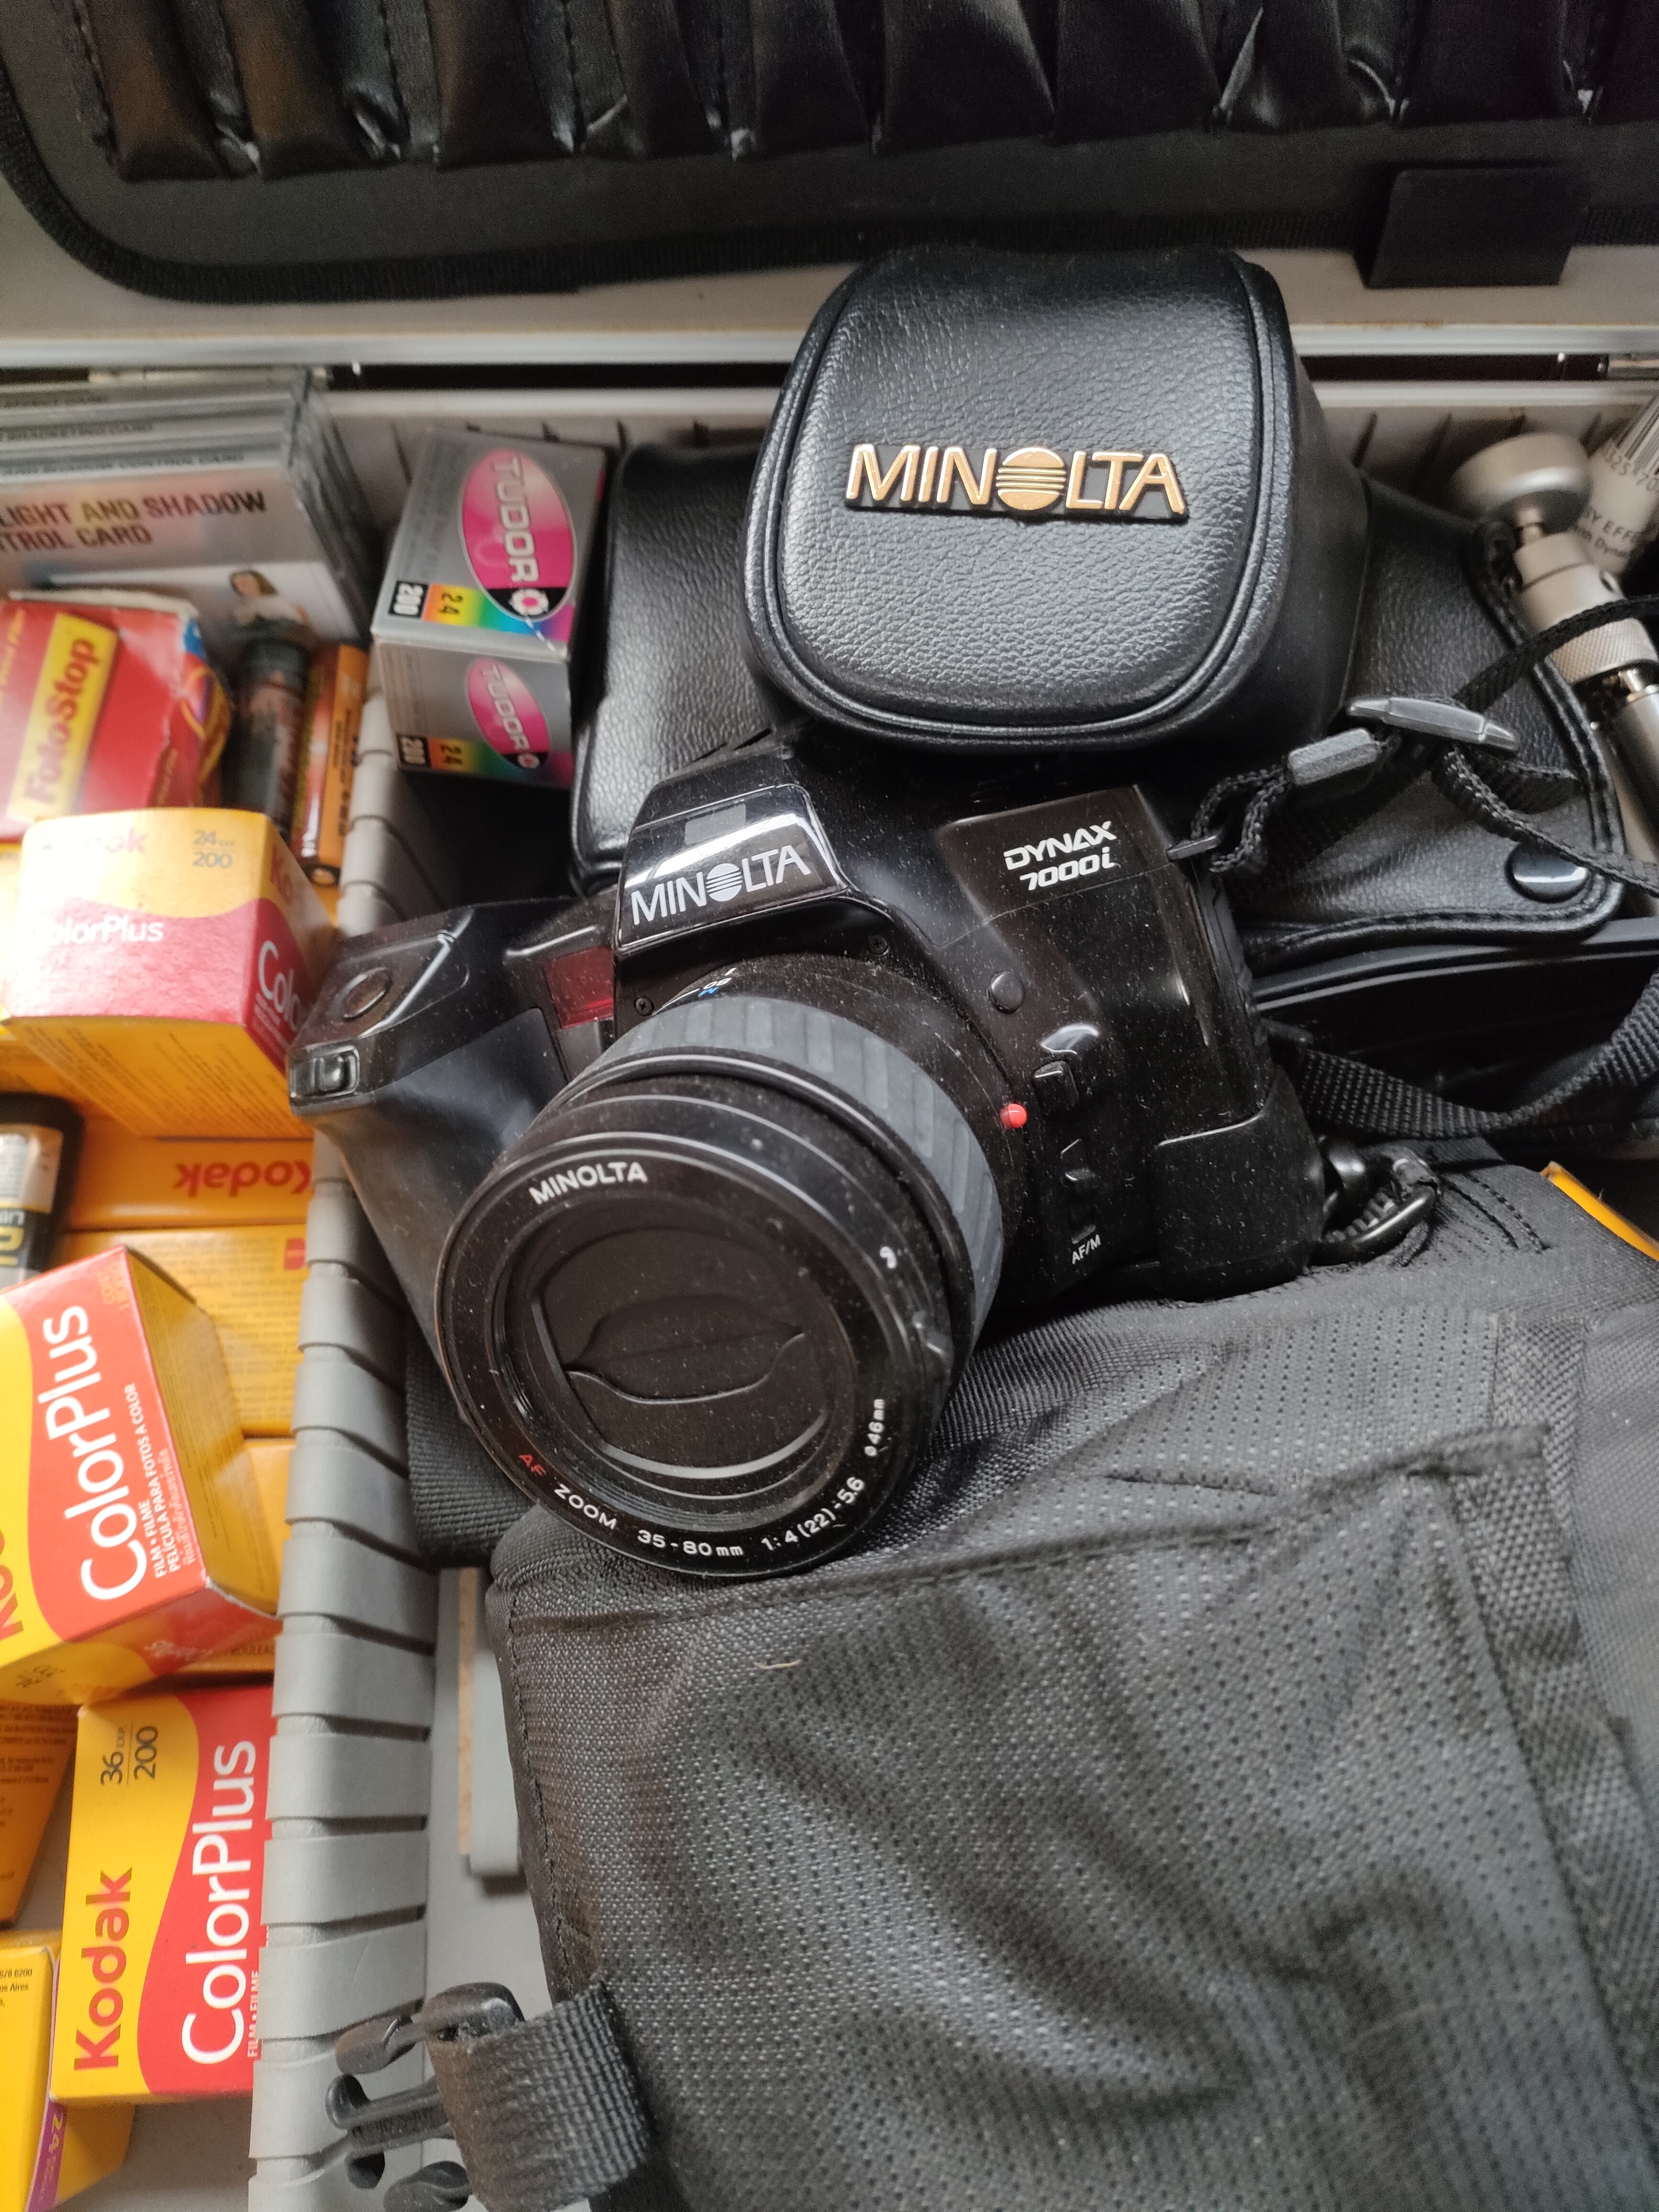 Minolta camera with accessories fitted in a case - Image 2 of 2